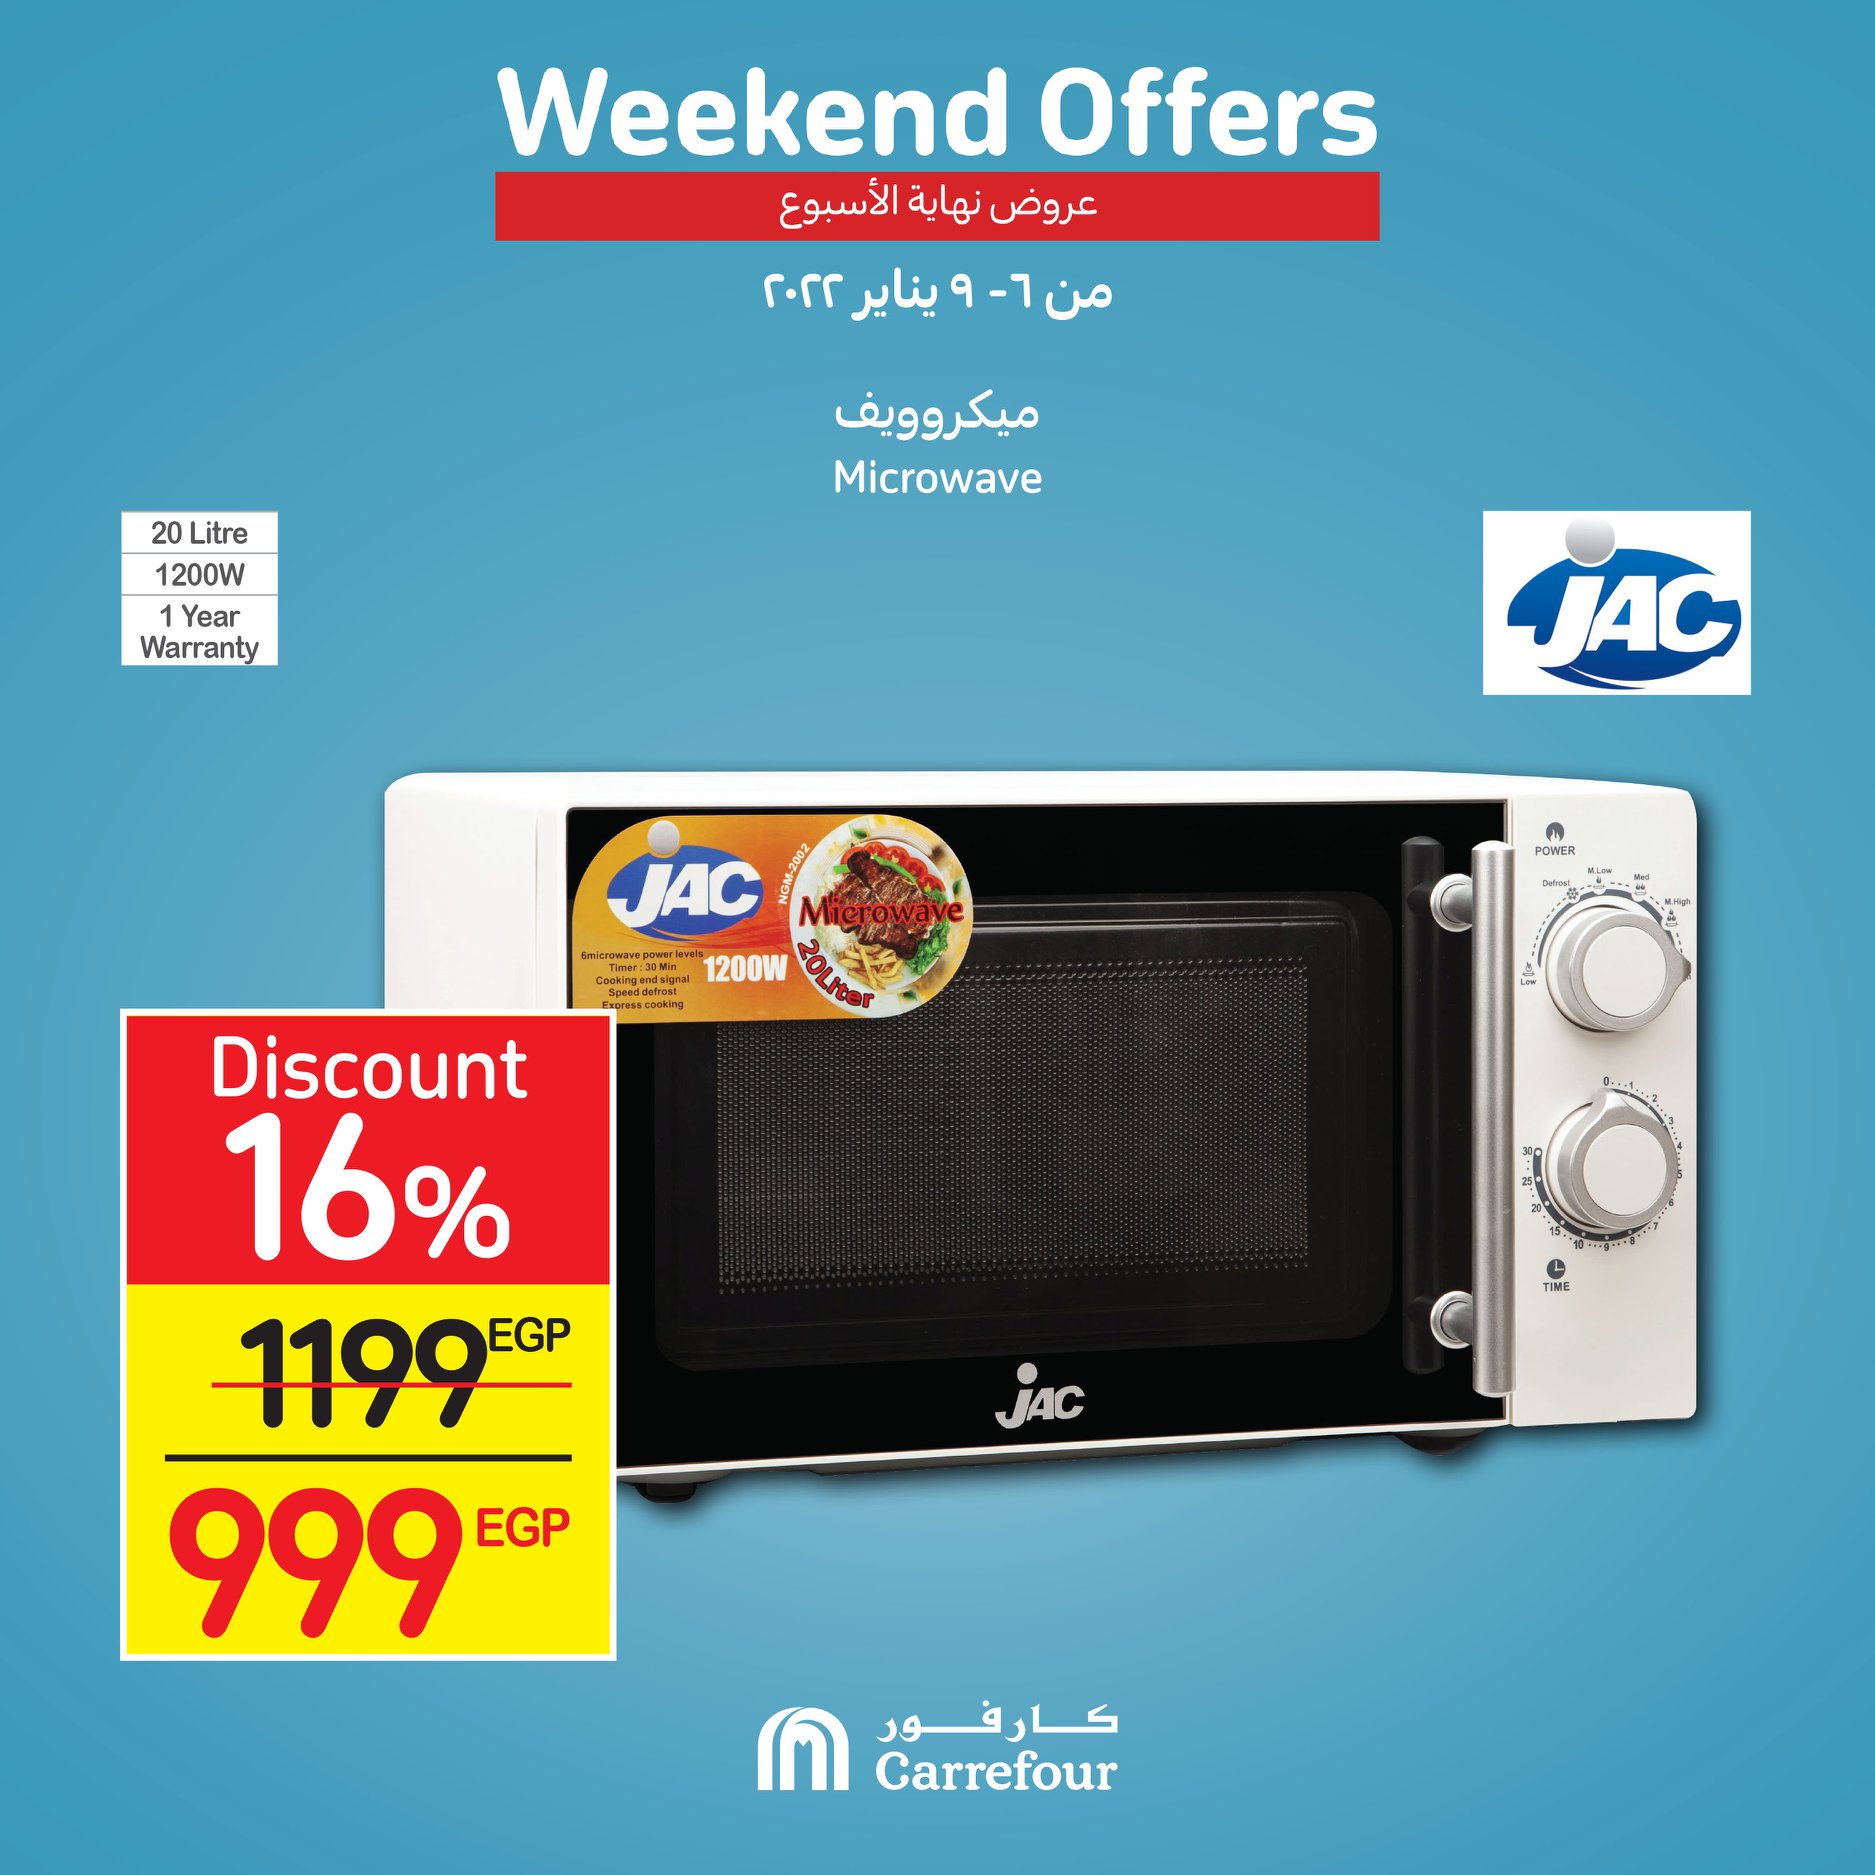 Now, the strongest Carrefour offers and surprises, half-price discounts, at Weekend until January 16th, 15